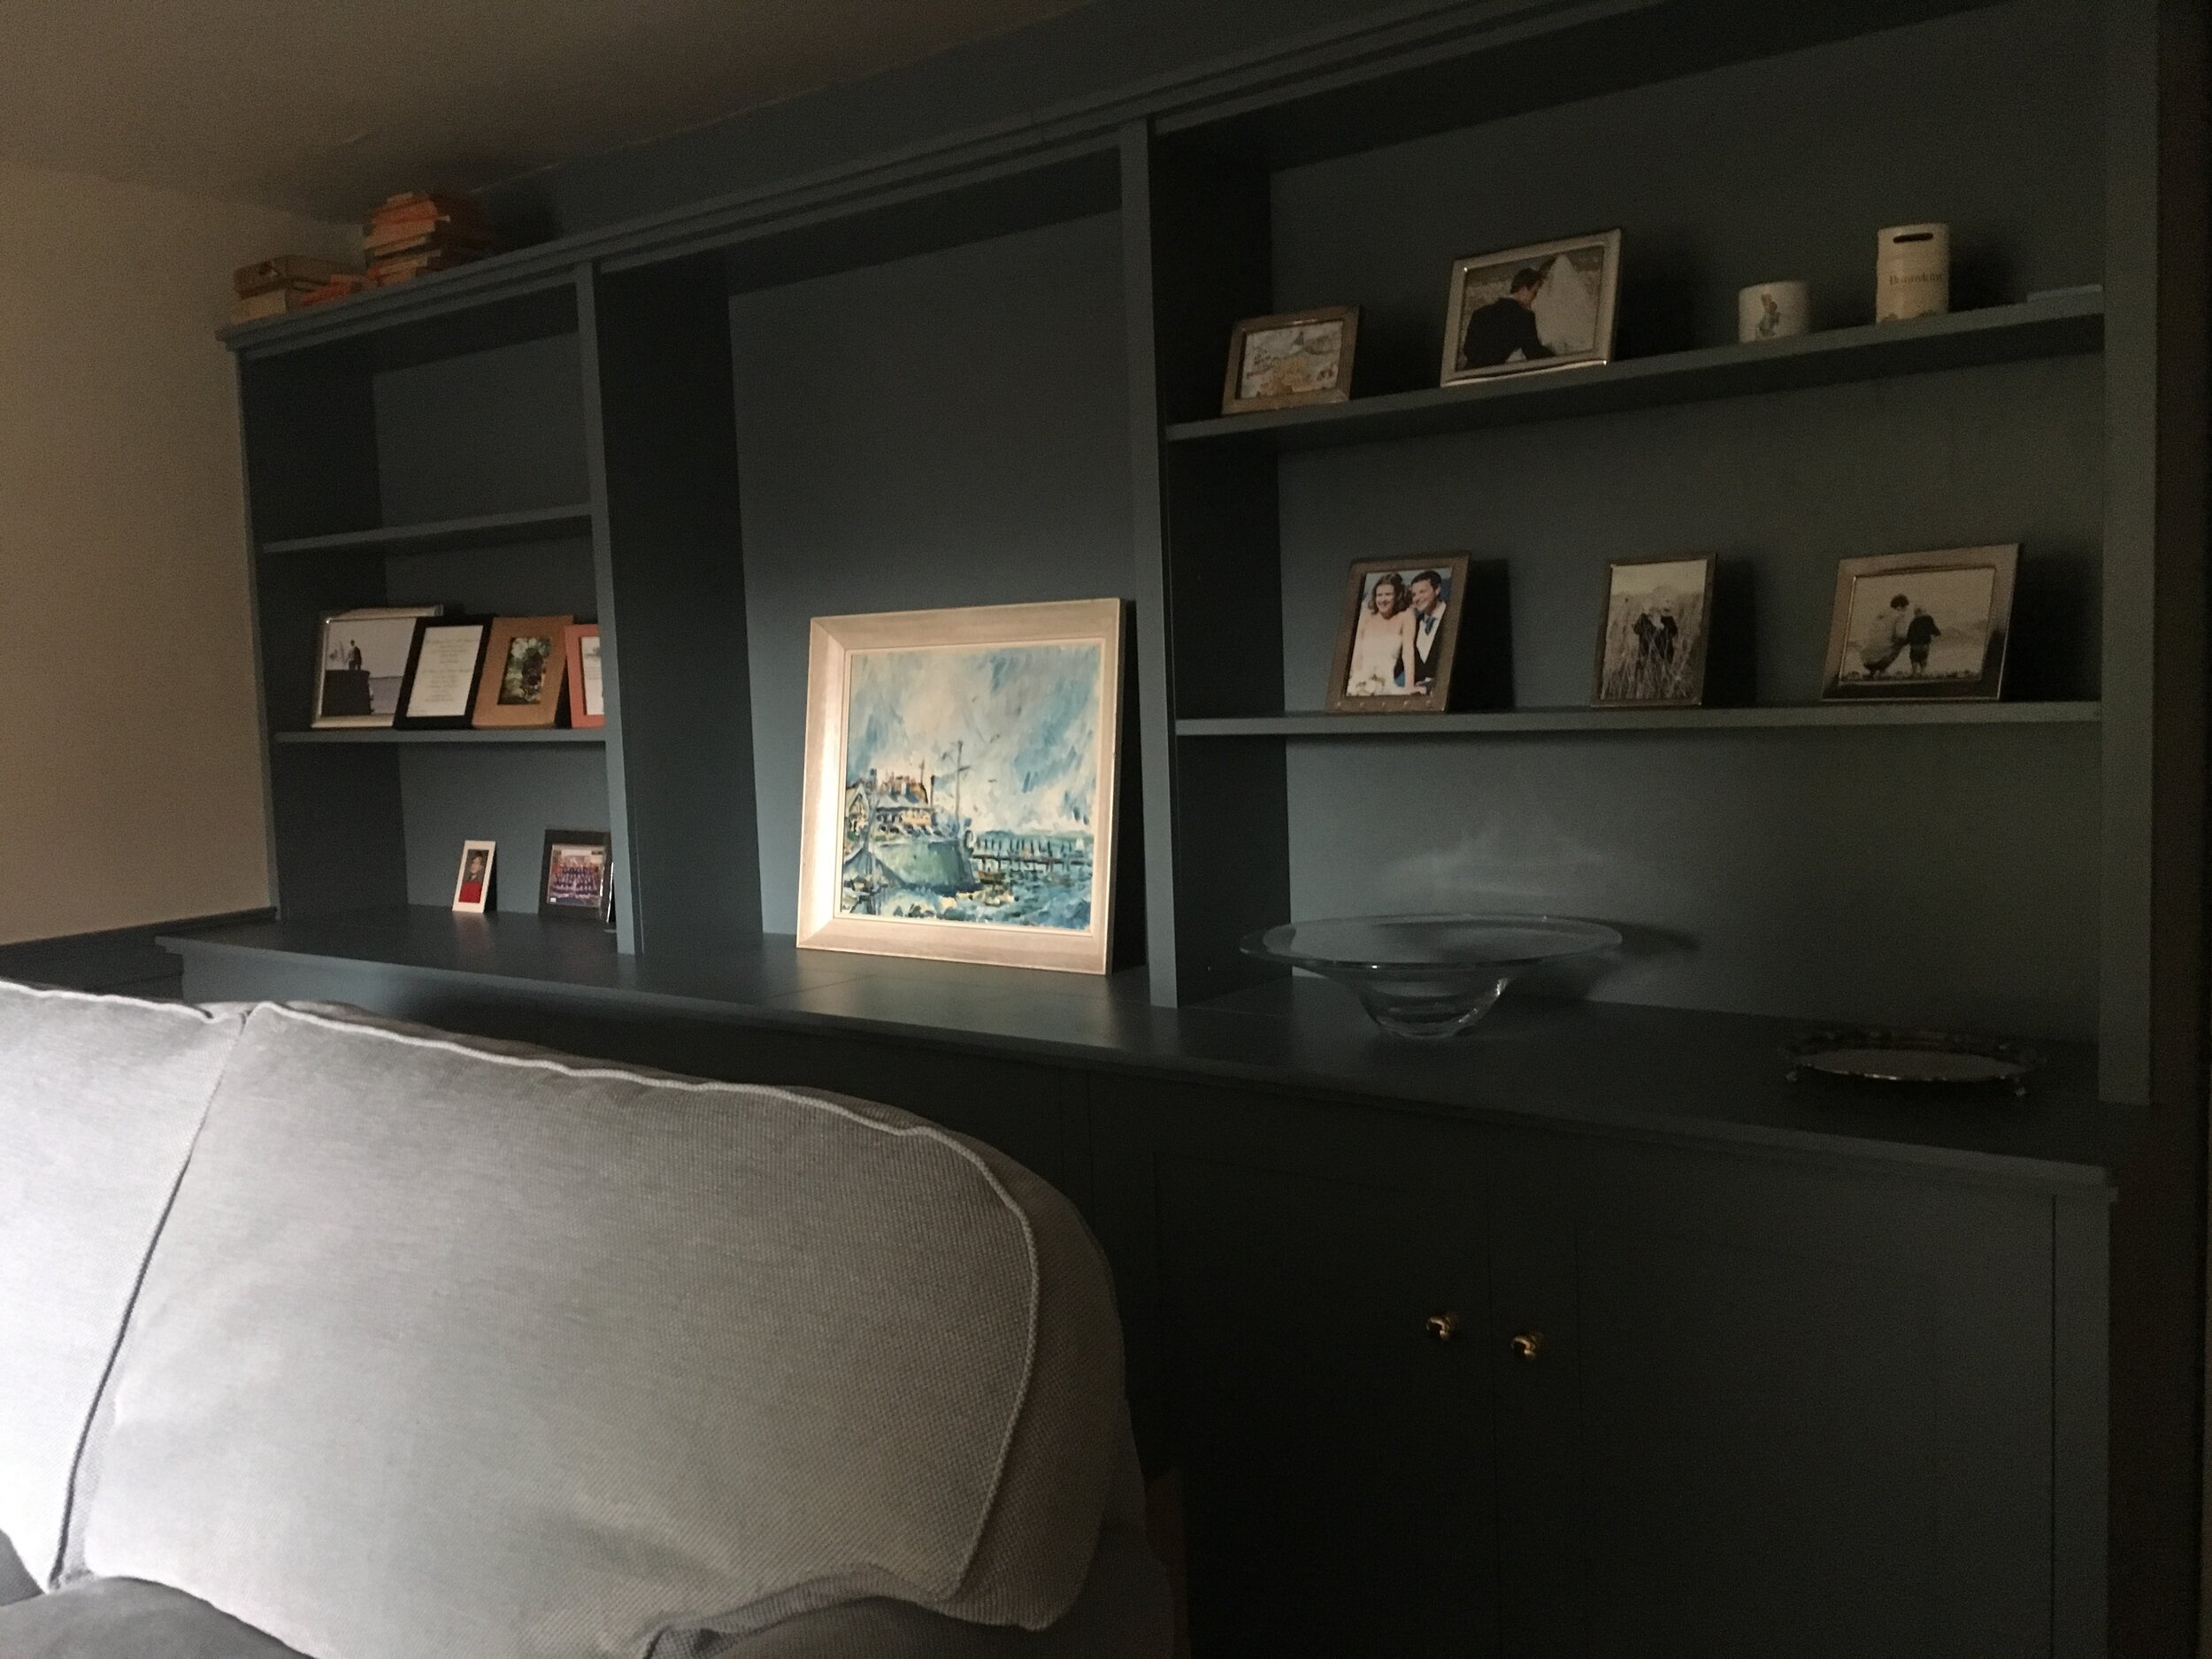 Sitting room bookcases, 2019